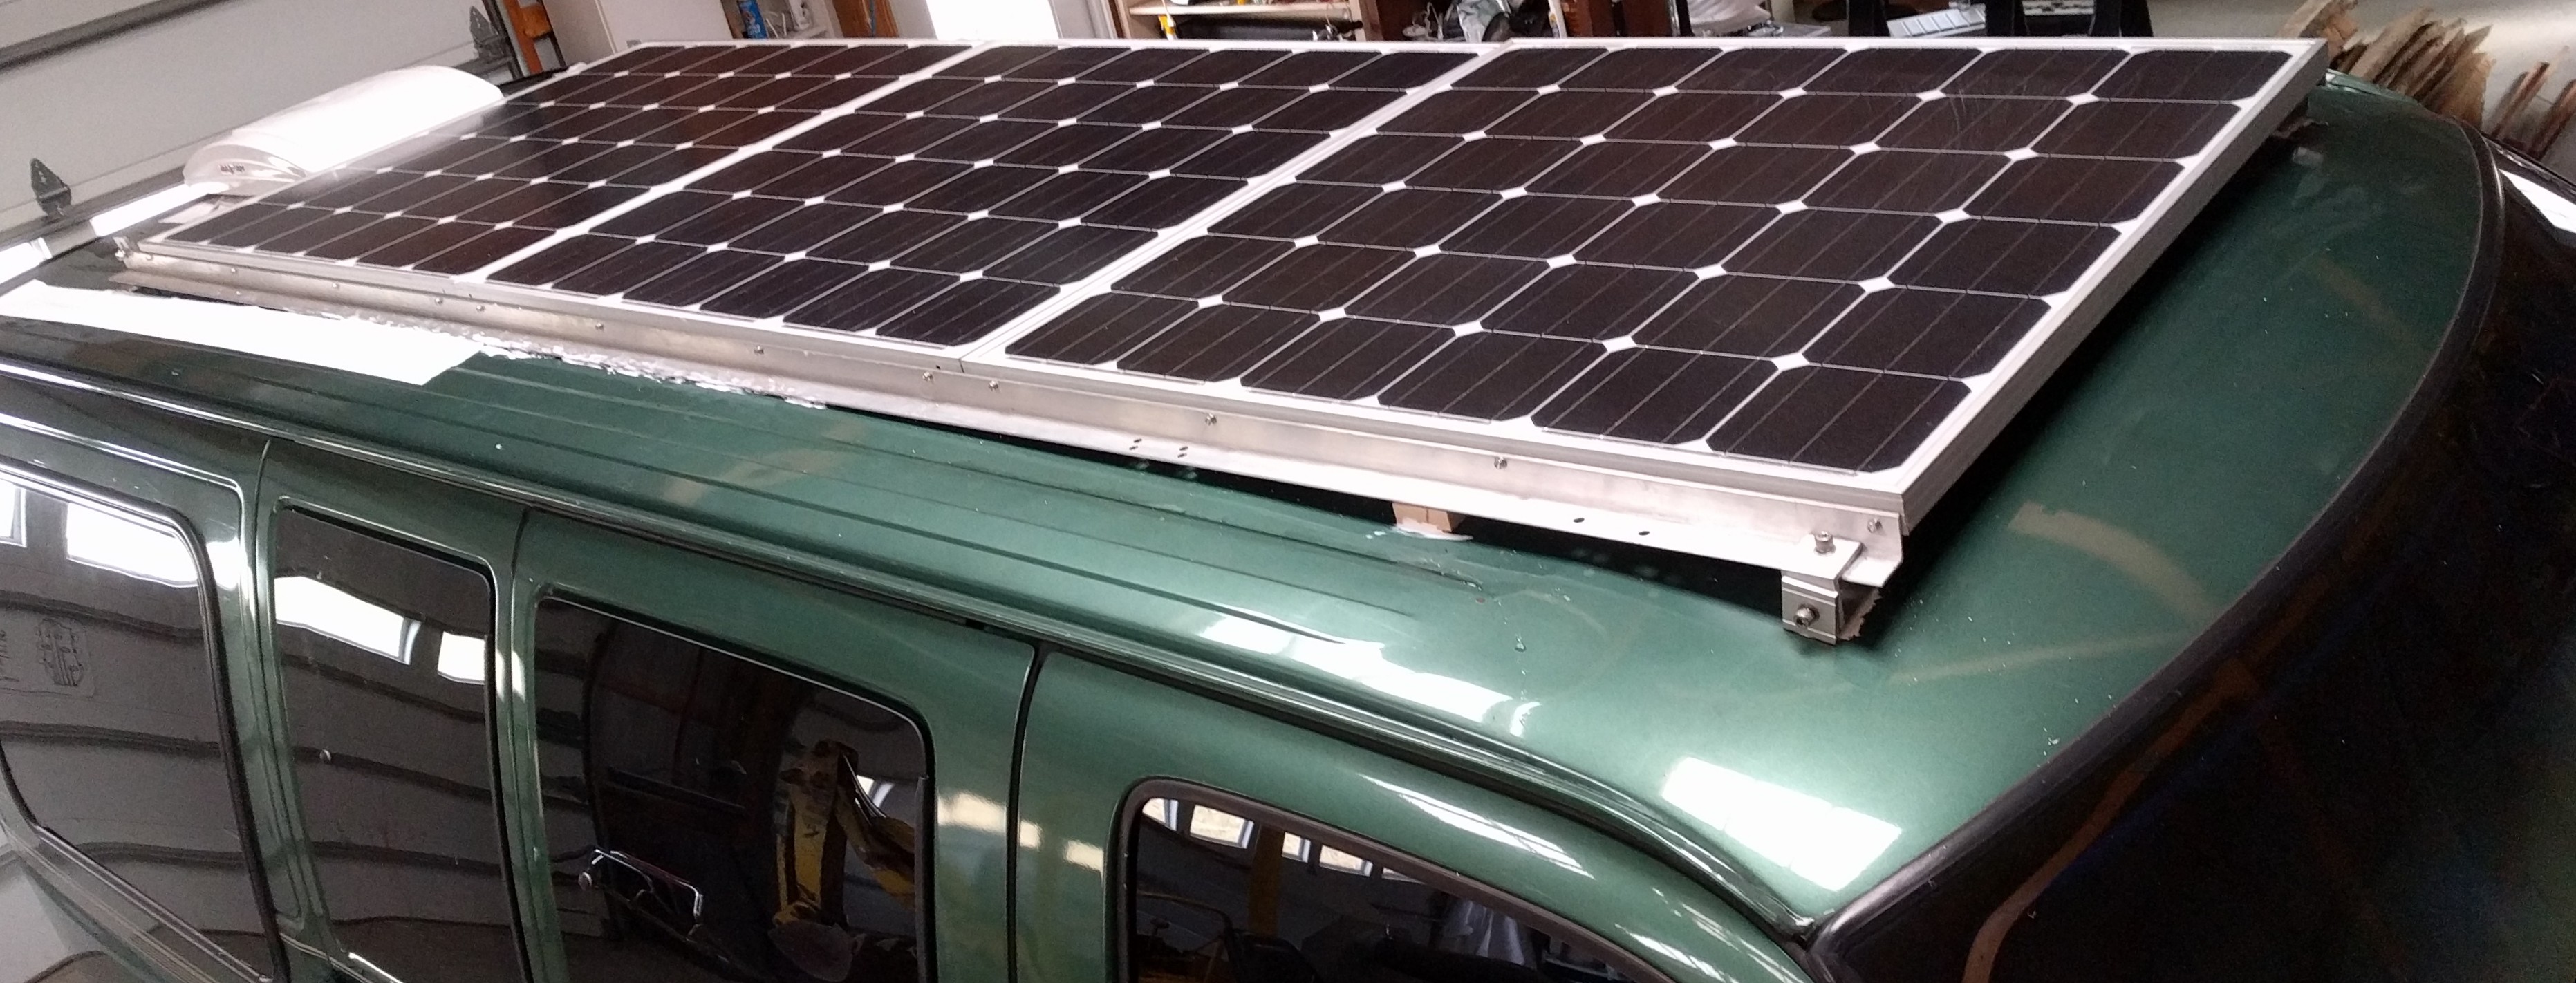 Get ready to go off-grid with this 200W foldable solar panel at $259 in New Green Deals